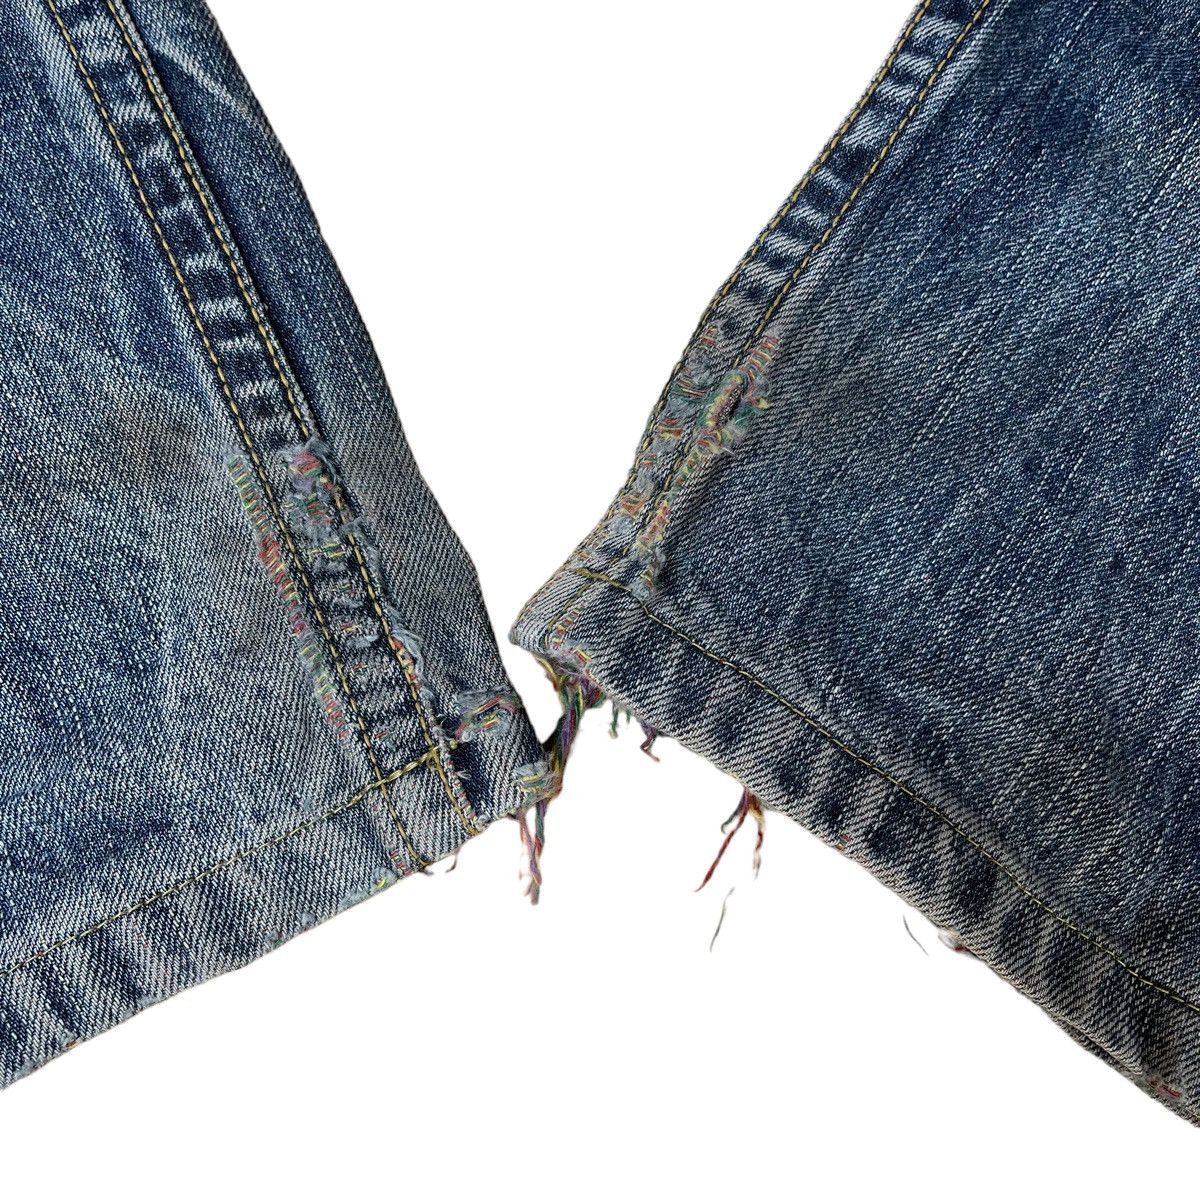 ✅BINDING NOW✅ Japanese Cloud72 Skull Jeans Disteressed Rare - 14